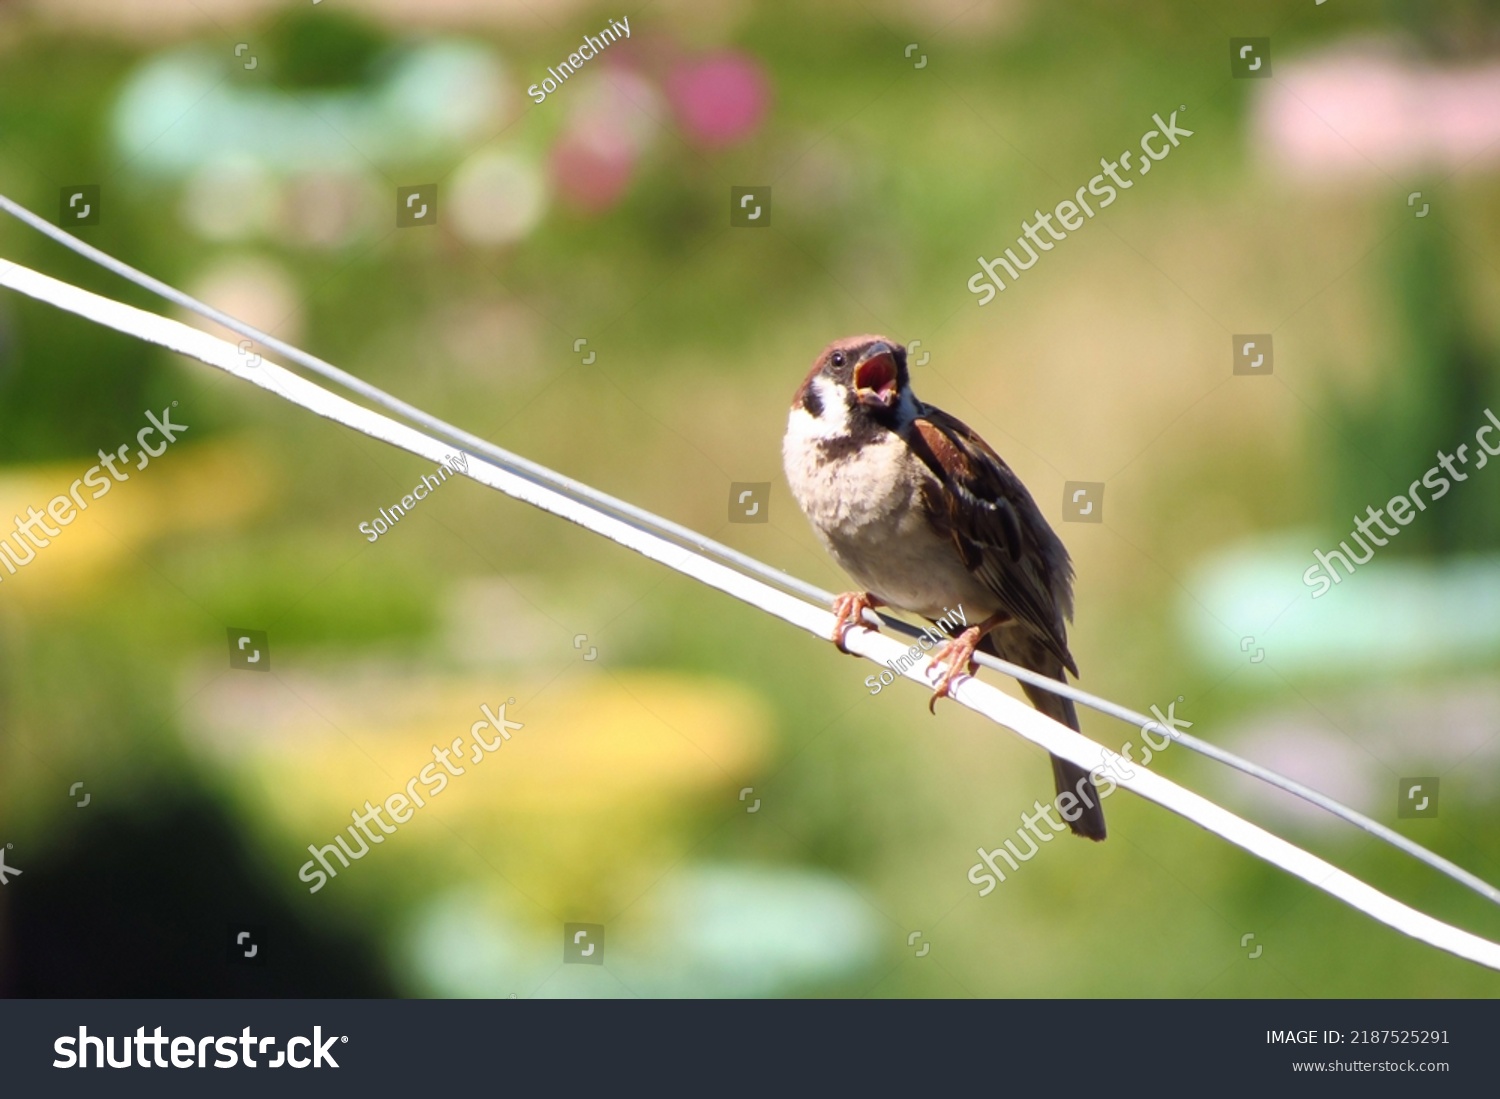                                A sparrow basks in the sun sitting on a wire, opens its beak. Sparrow with open beak. #2187525291